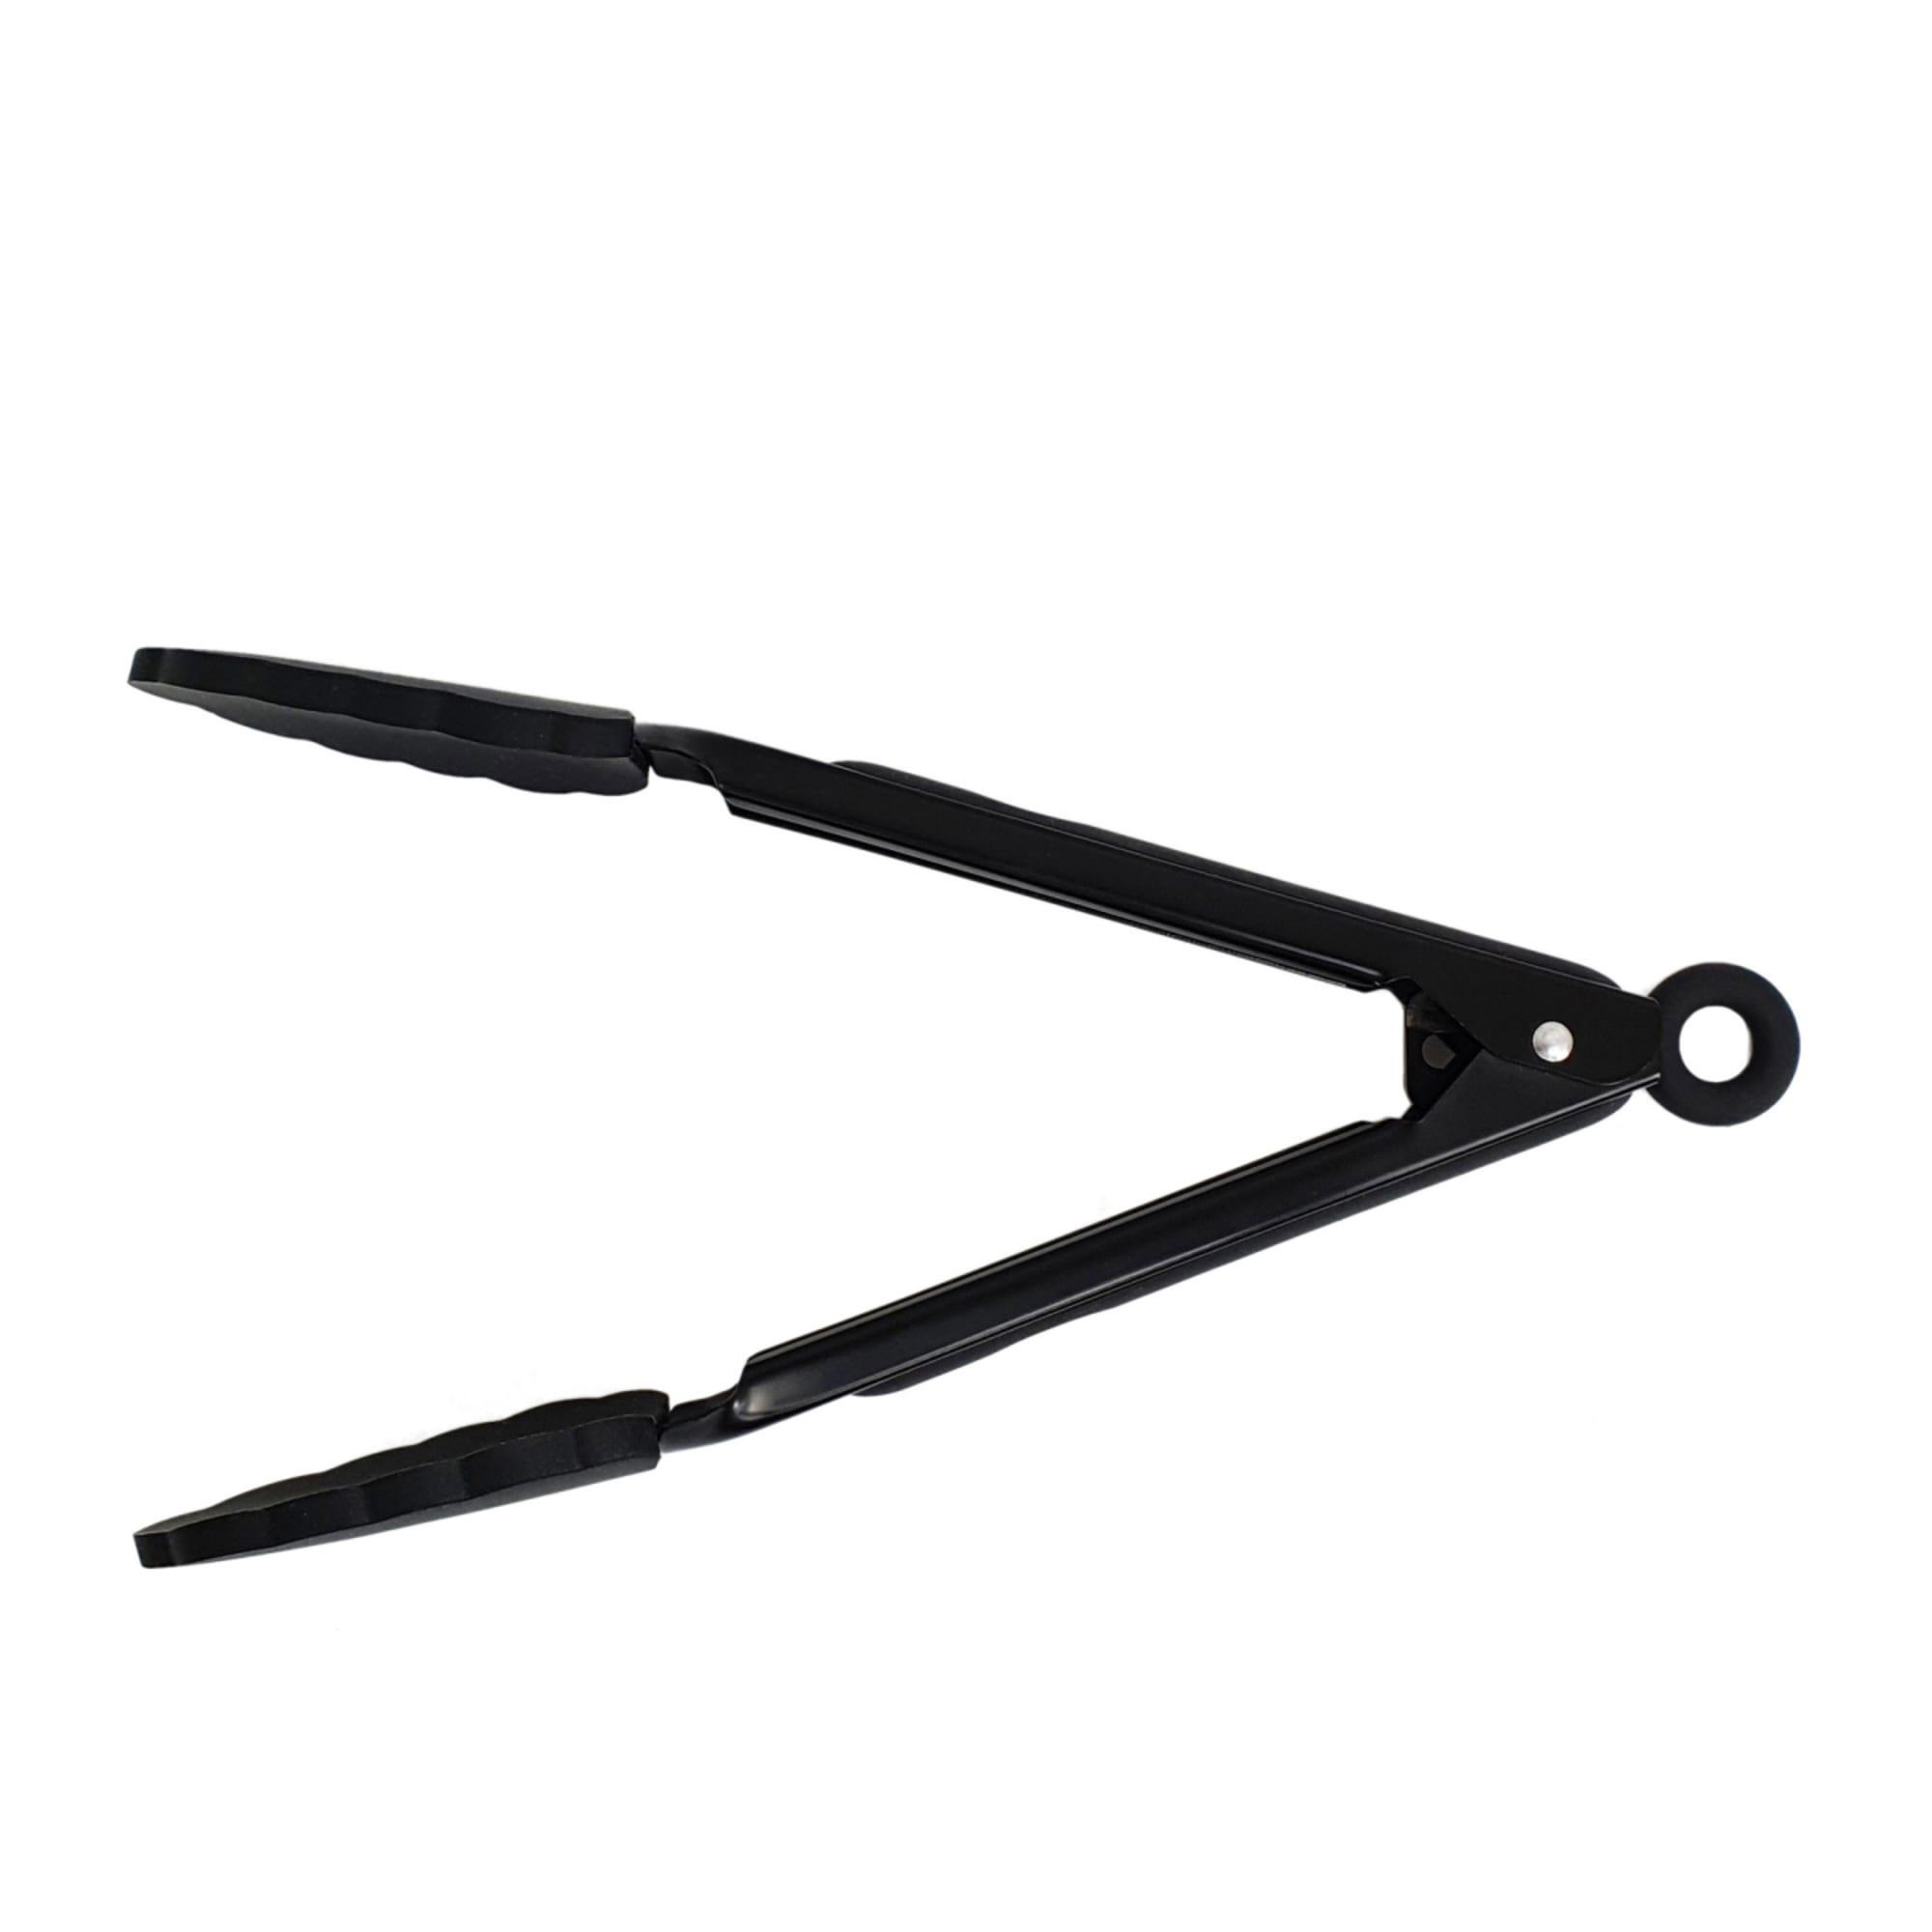 St. Clare Heavy Duty Tongs with Silicone Grip 30cm Black Image 3